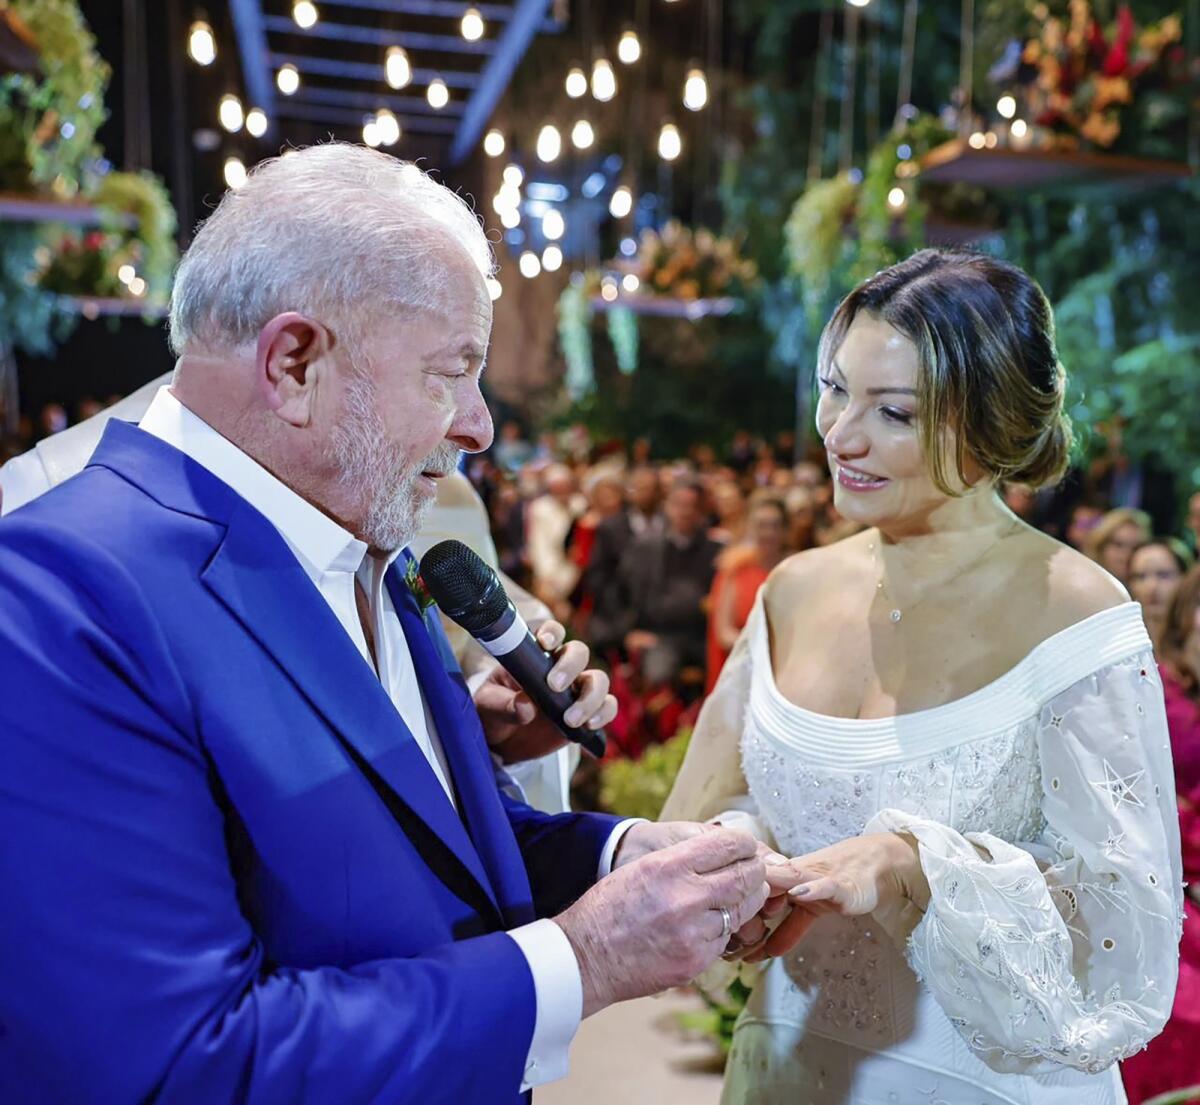 In this photo released by the 2022 campaign press office of Luiz Inacio Lula da Silva, Brazil's former president Luiz Inacio Lula da Silva, left, and sociologist Rosangela Silva get married in Sao Paulo Brazil, Wednesday, May 18, 2022. Brazil's former president and front-runner for October's elections Da Silva got married in a ceremony that had a political touch as he seeks to return to the office he held between 2003 and 2010. (Ricardo Stuckert/Lula 2022 Campaign Press Office via AP)